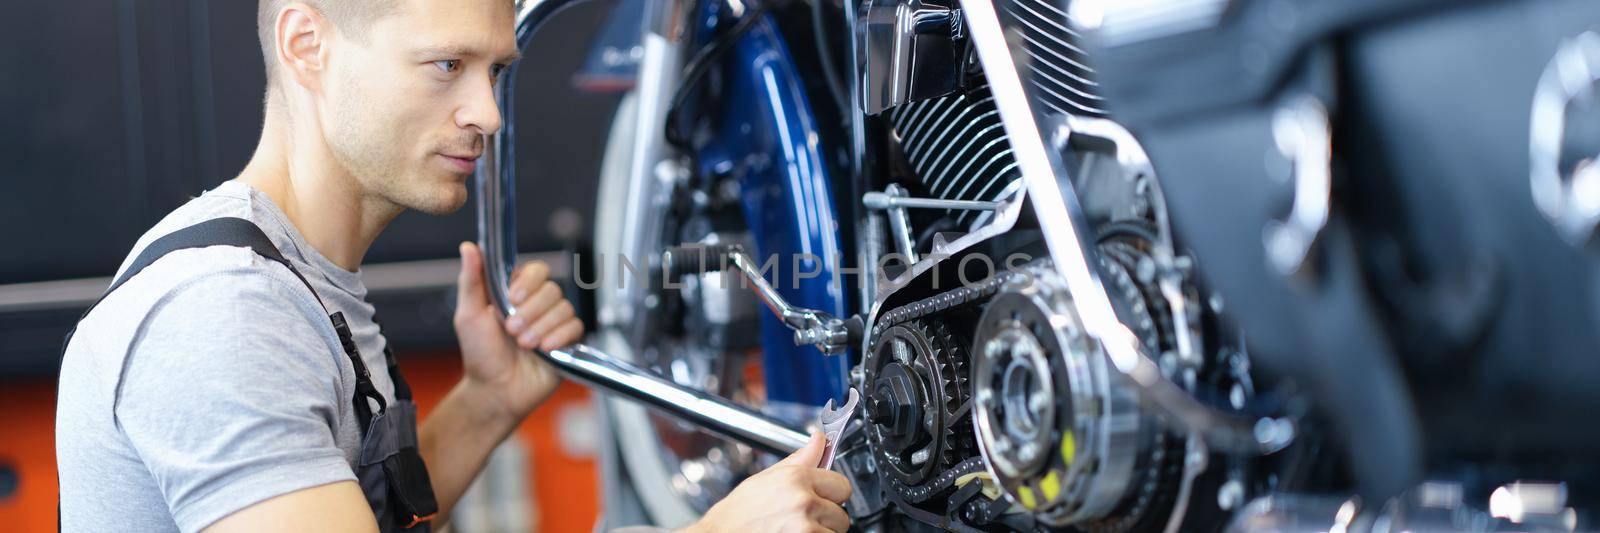 Male car mechanic holds wrench and looks at open motorcycle engine. High-quality motorcycle repair and maintenance concept